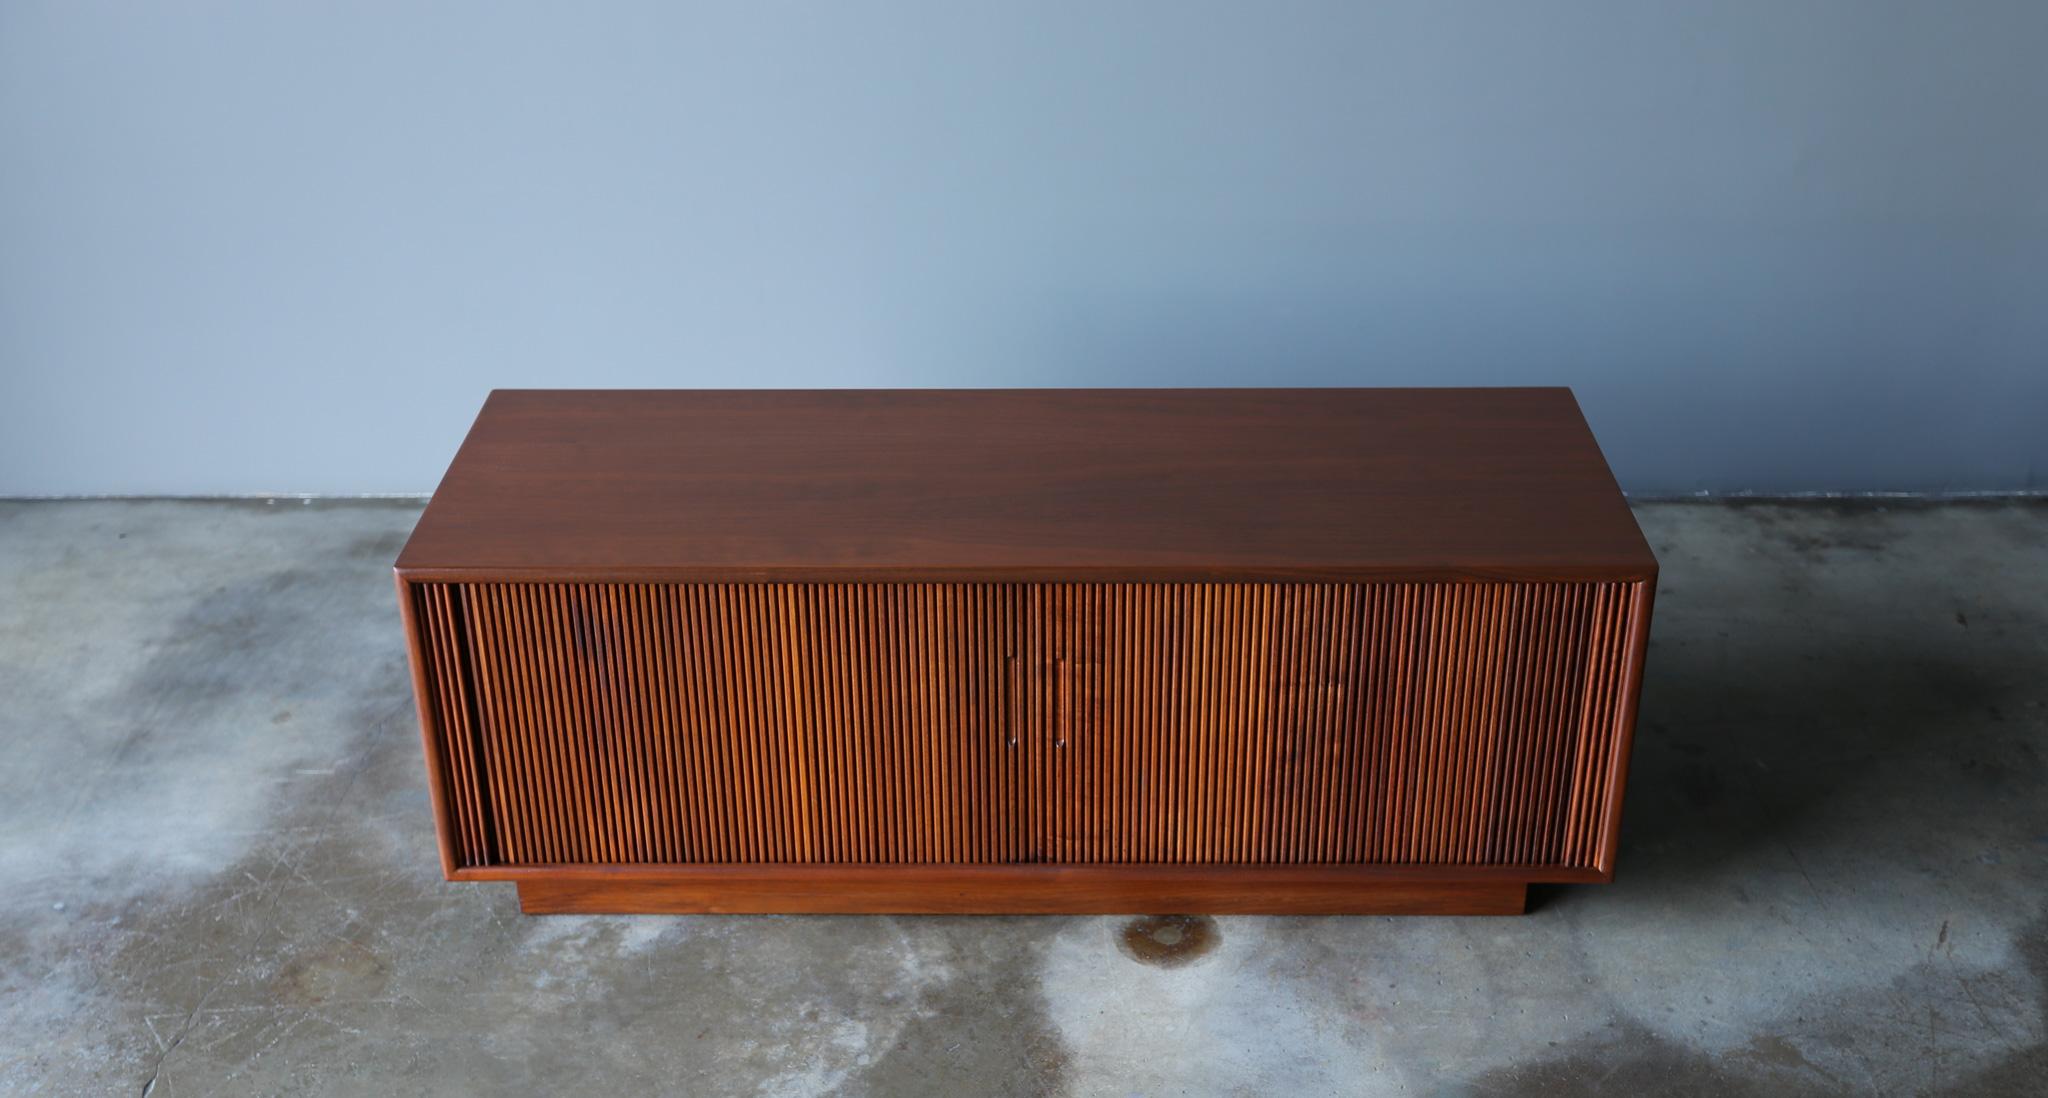 Walnut Low Profile Tambour Door Credenza, United States, c.1965.  This piece has been professionally restored.  